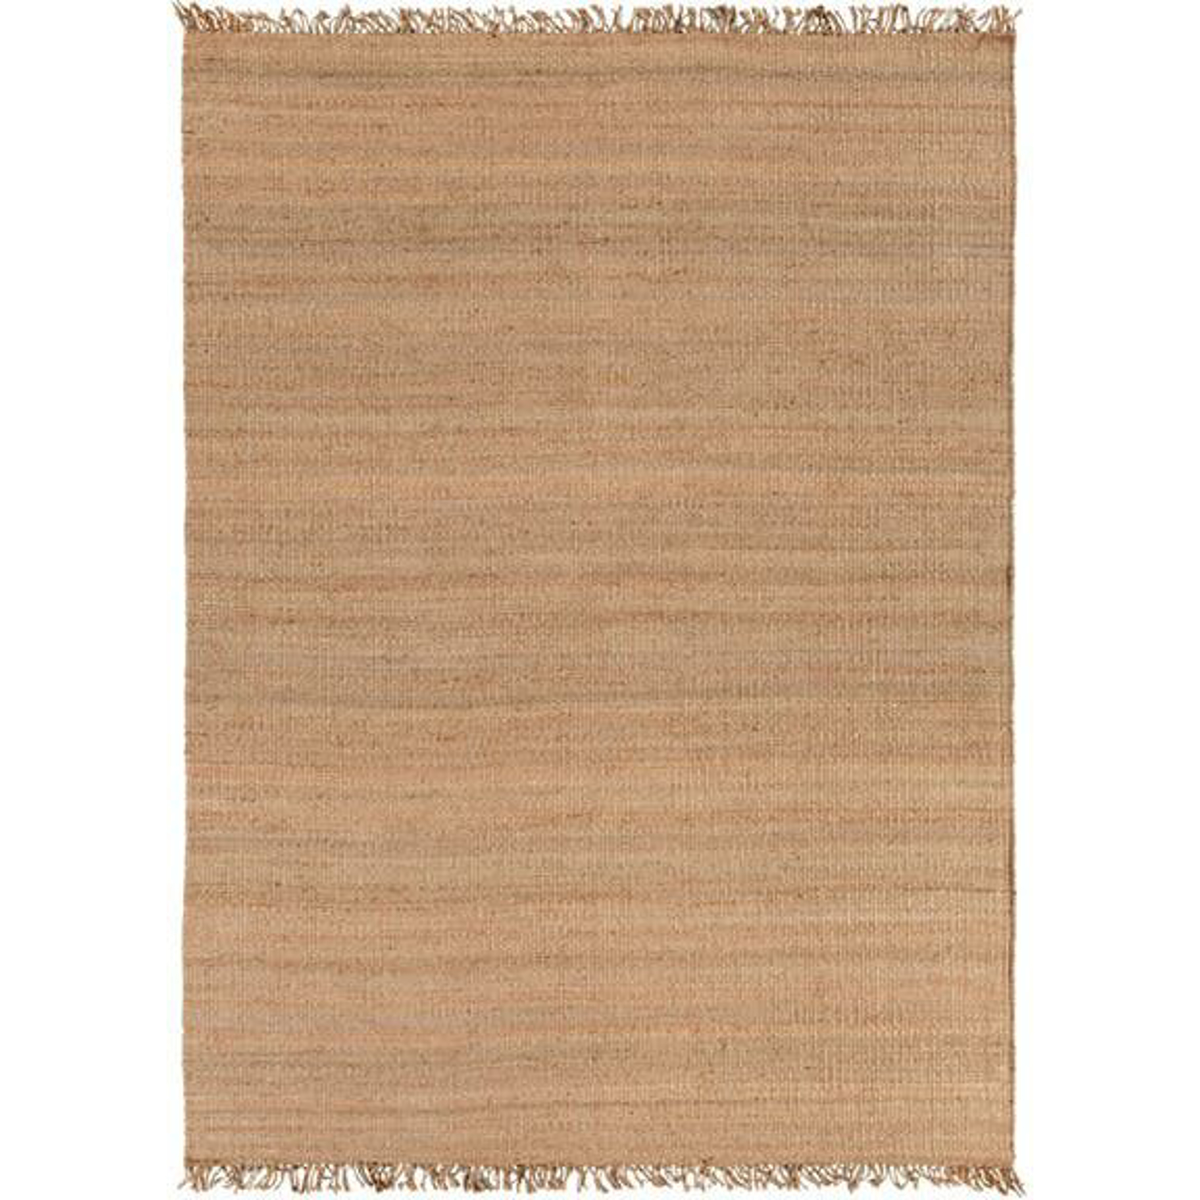 Picture of Jute Natural Area Rug